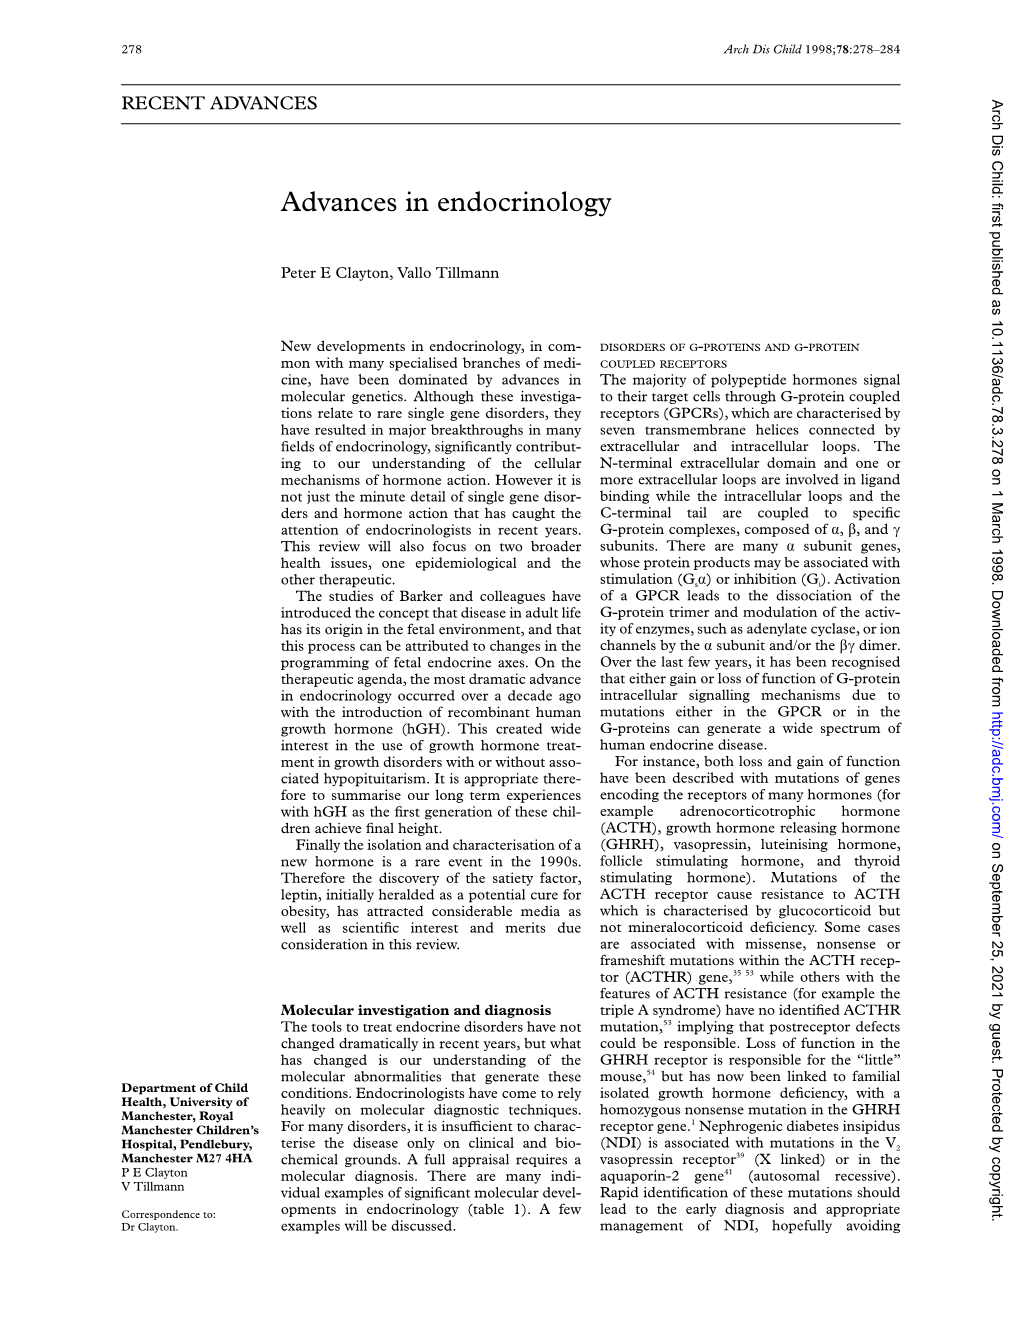 Advances in Endocrinology